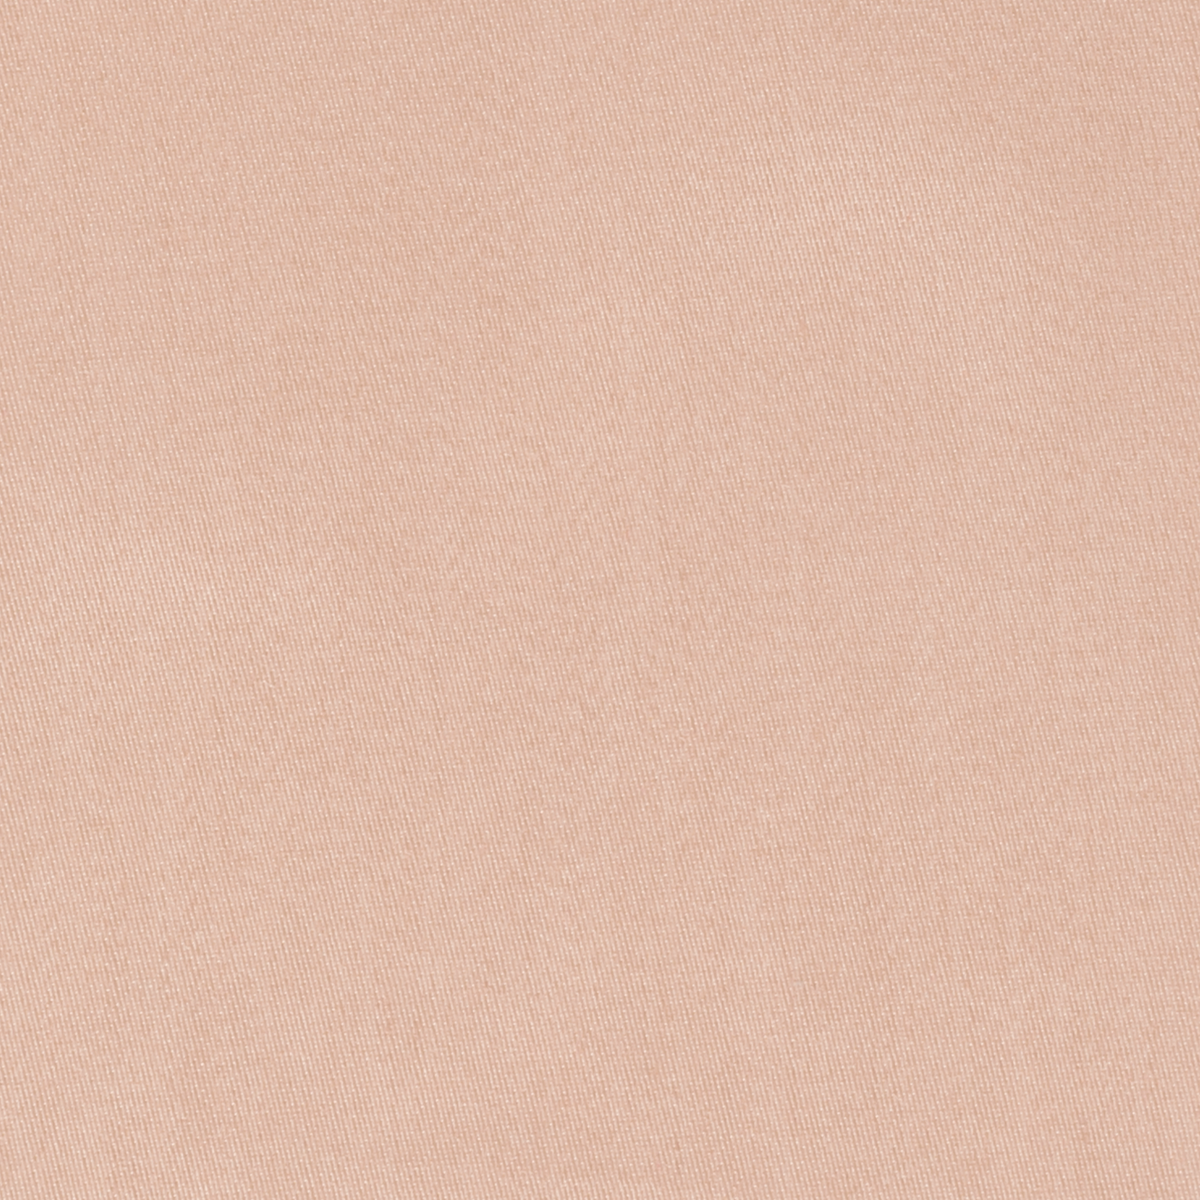 Fabric Closeup of Home Treasures Royal Sateen Bedding in Blush Color